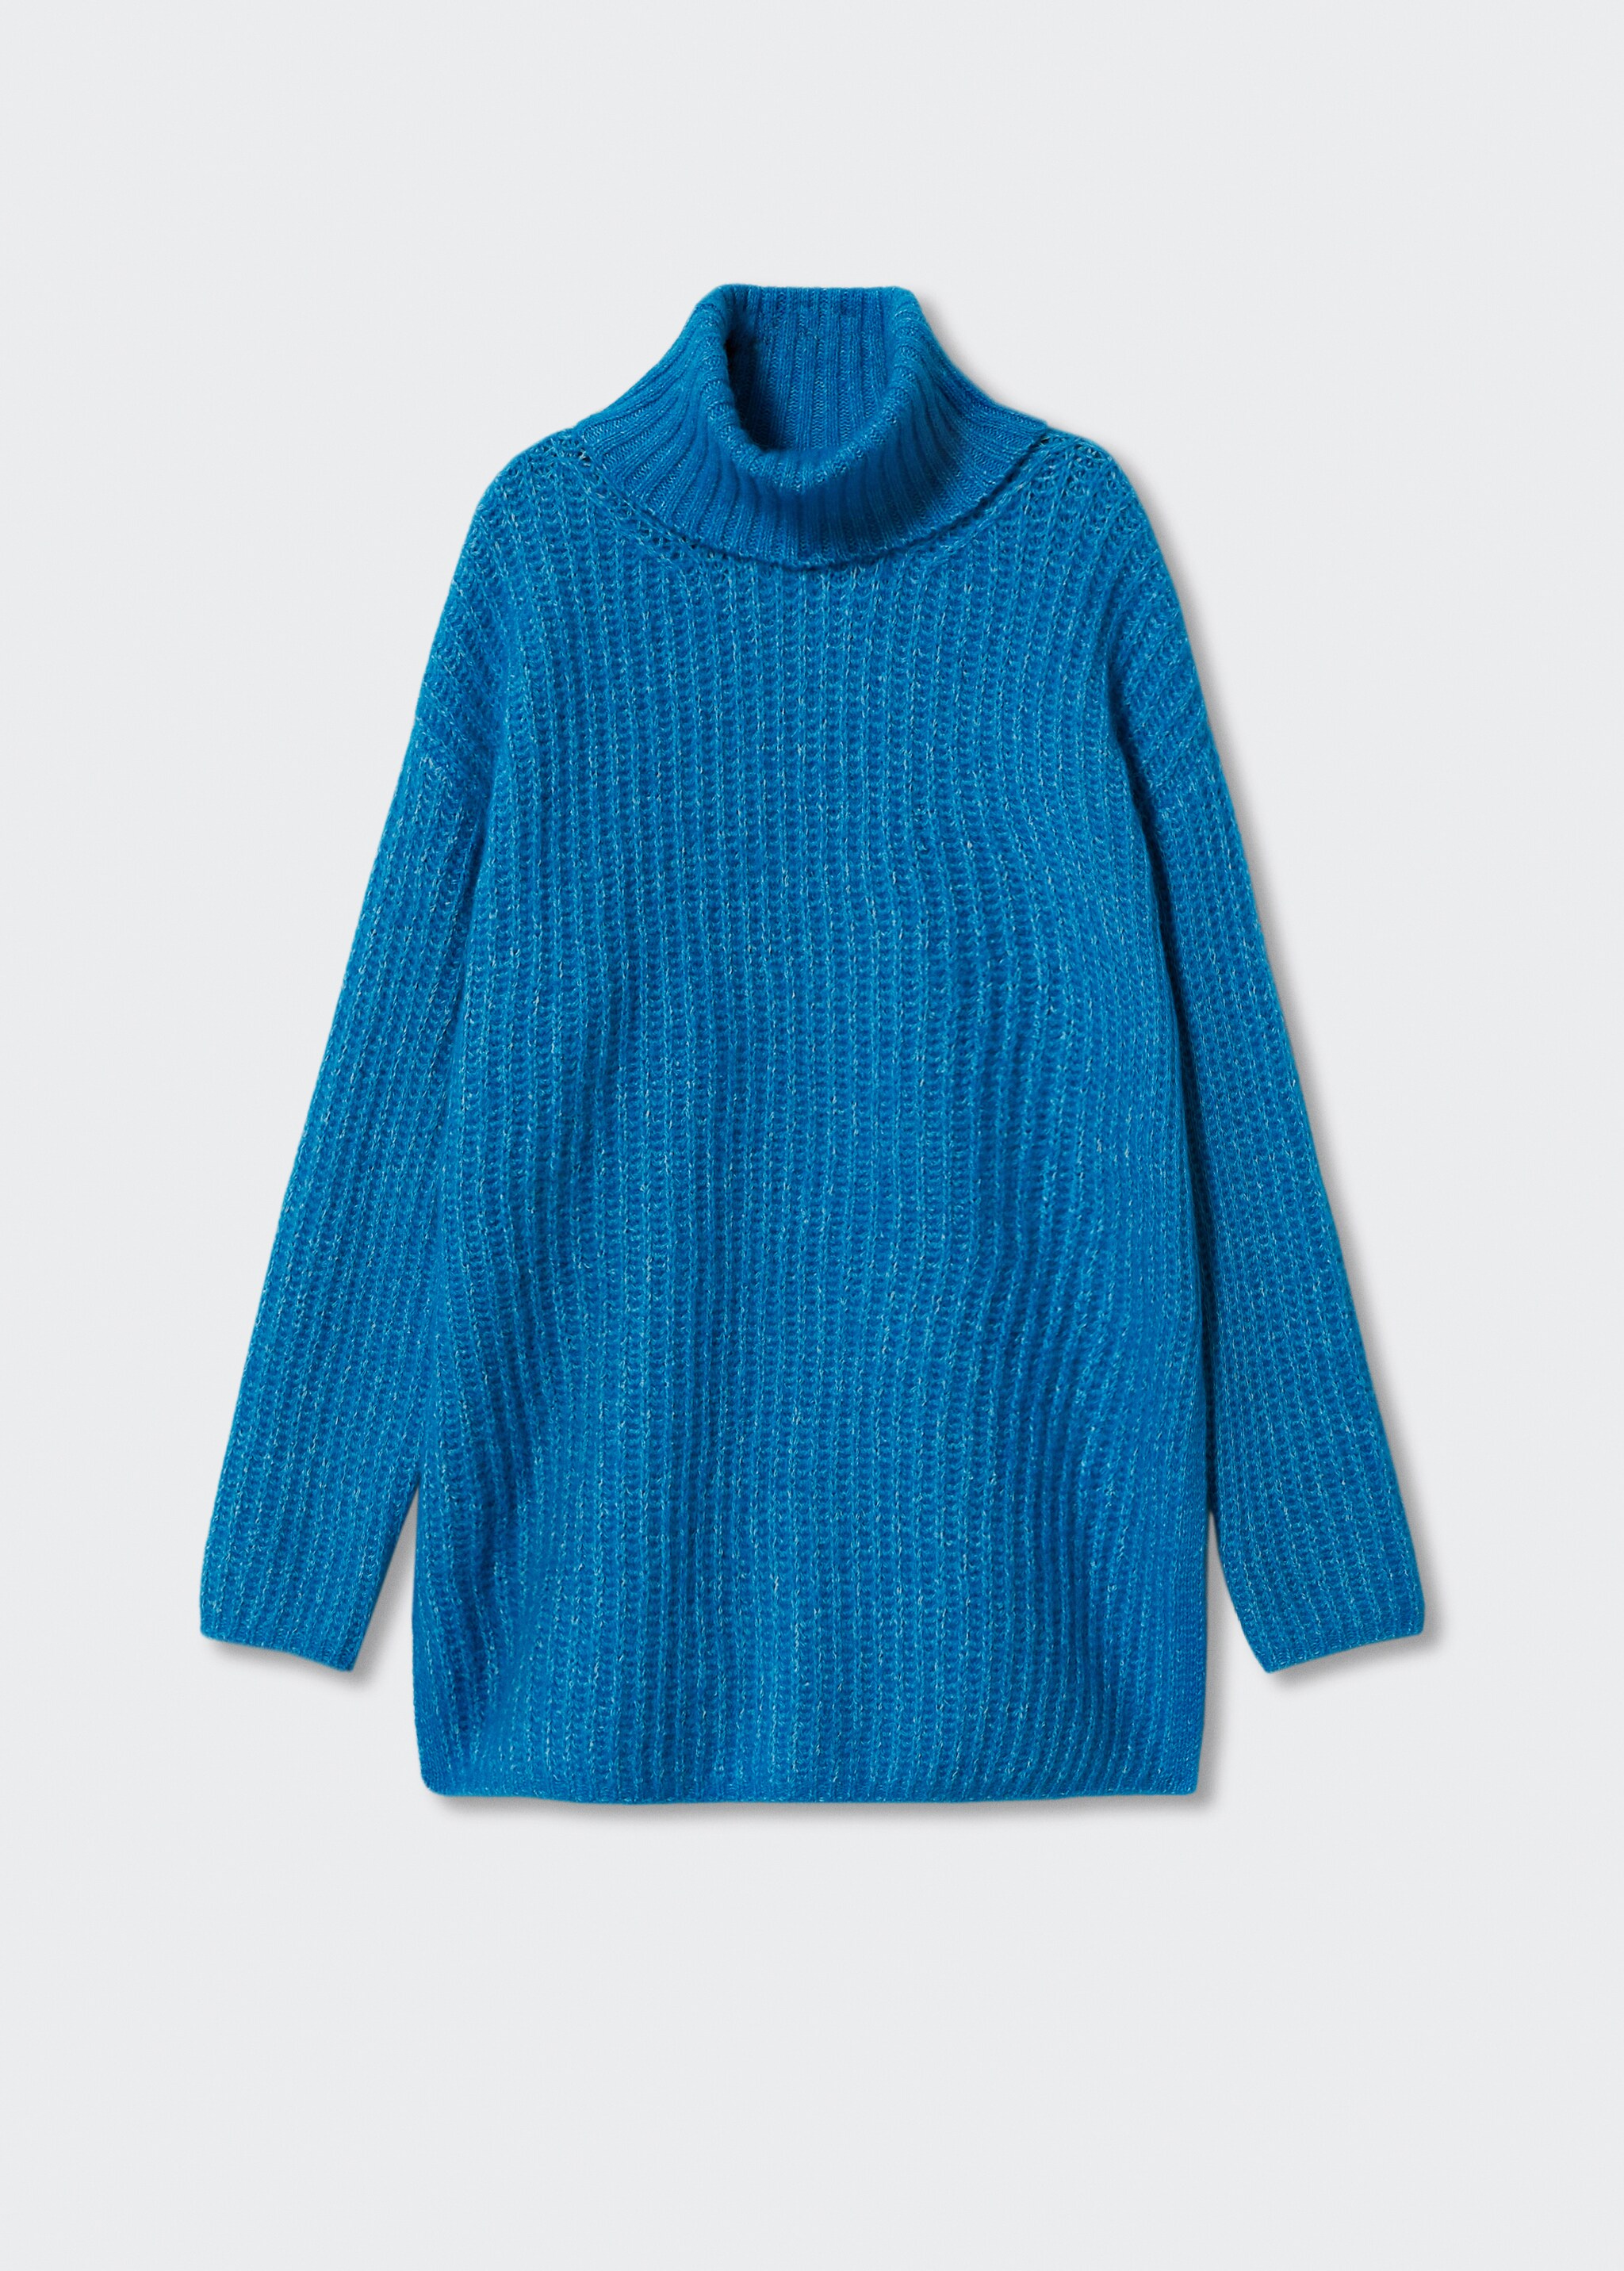 Oversized perkins neck sweater - Article without model